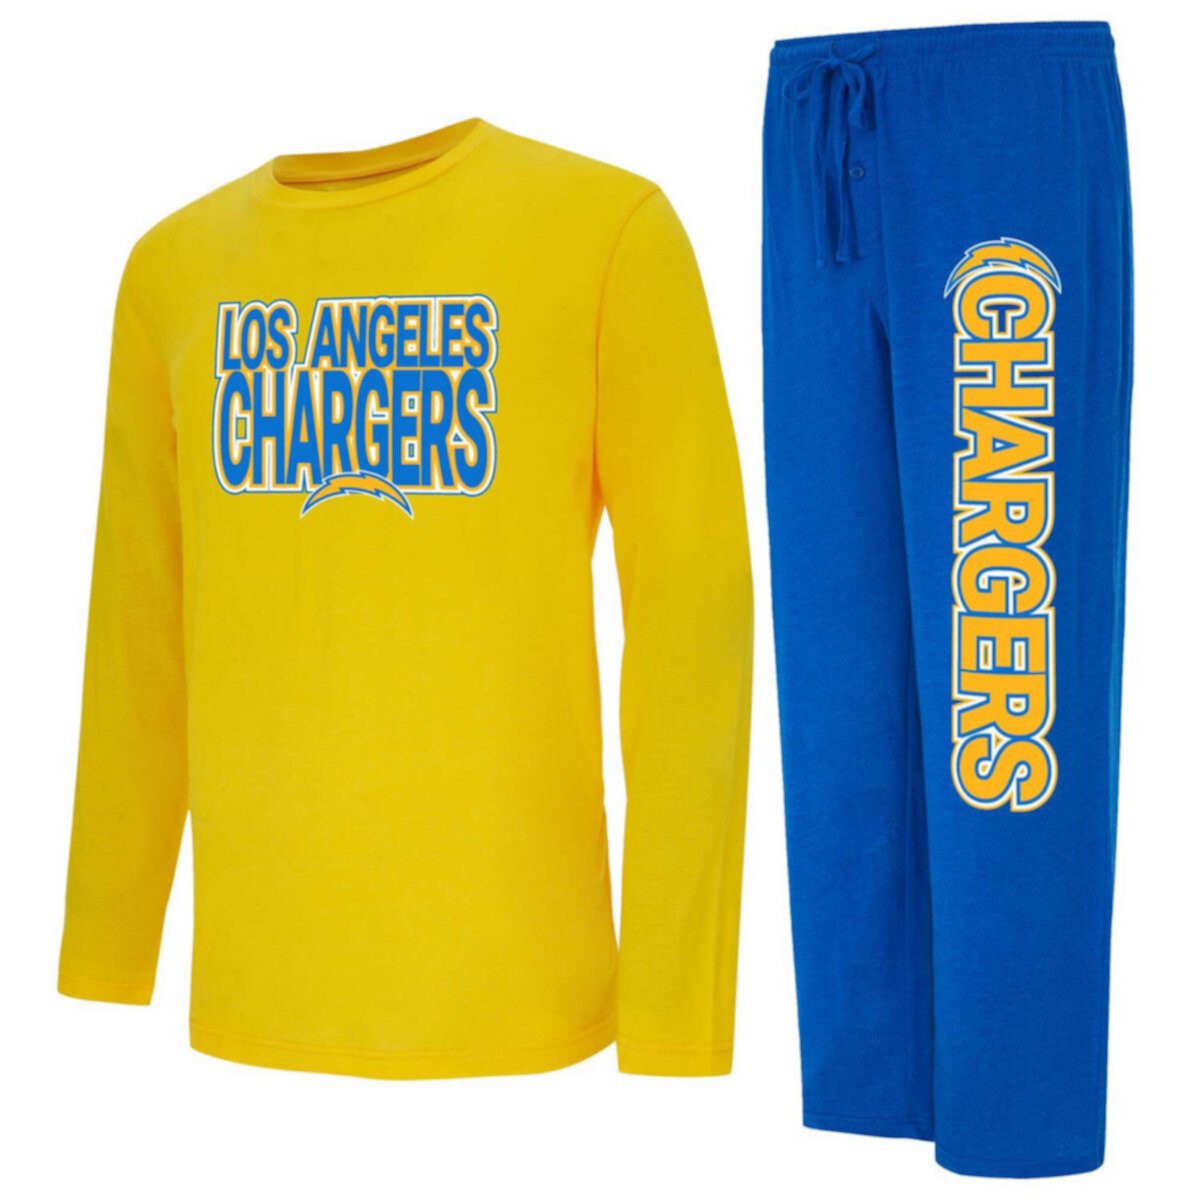 Men's Concepts Sport Powder Blue/Gold Los Angeles Chargers Meter Long Sleeve T-Shirt and Pants Sleep Set Unbranded